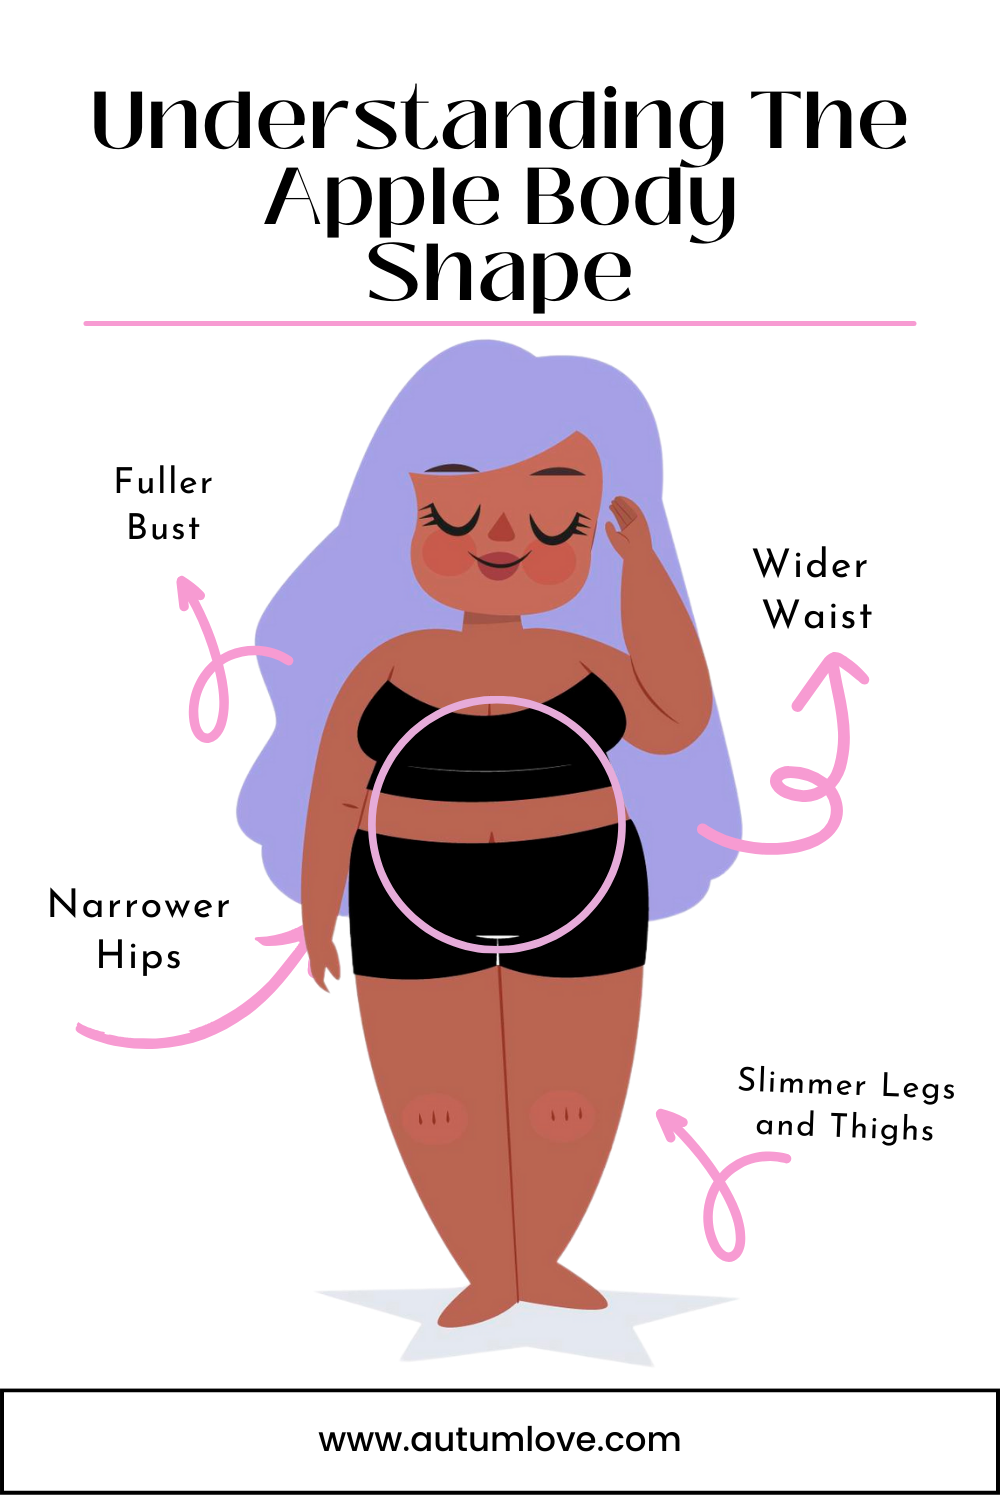 Your Essential Guide to Skin Tightening and Body Shaping